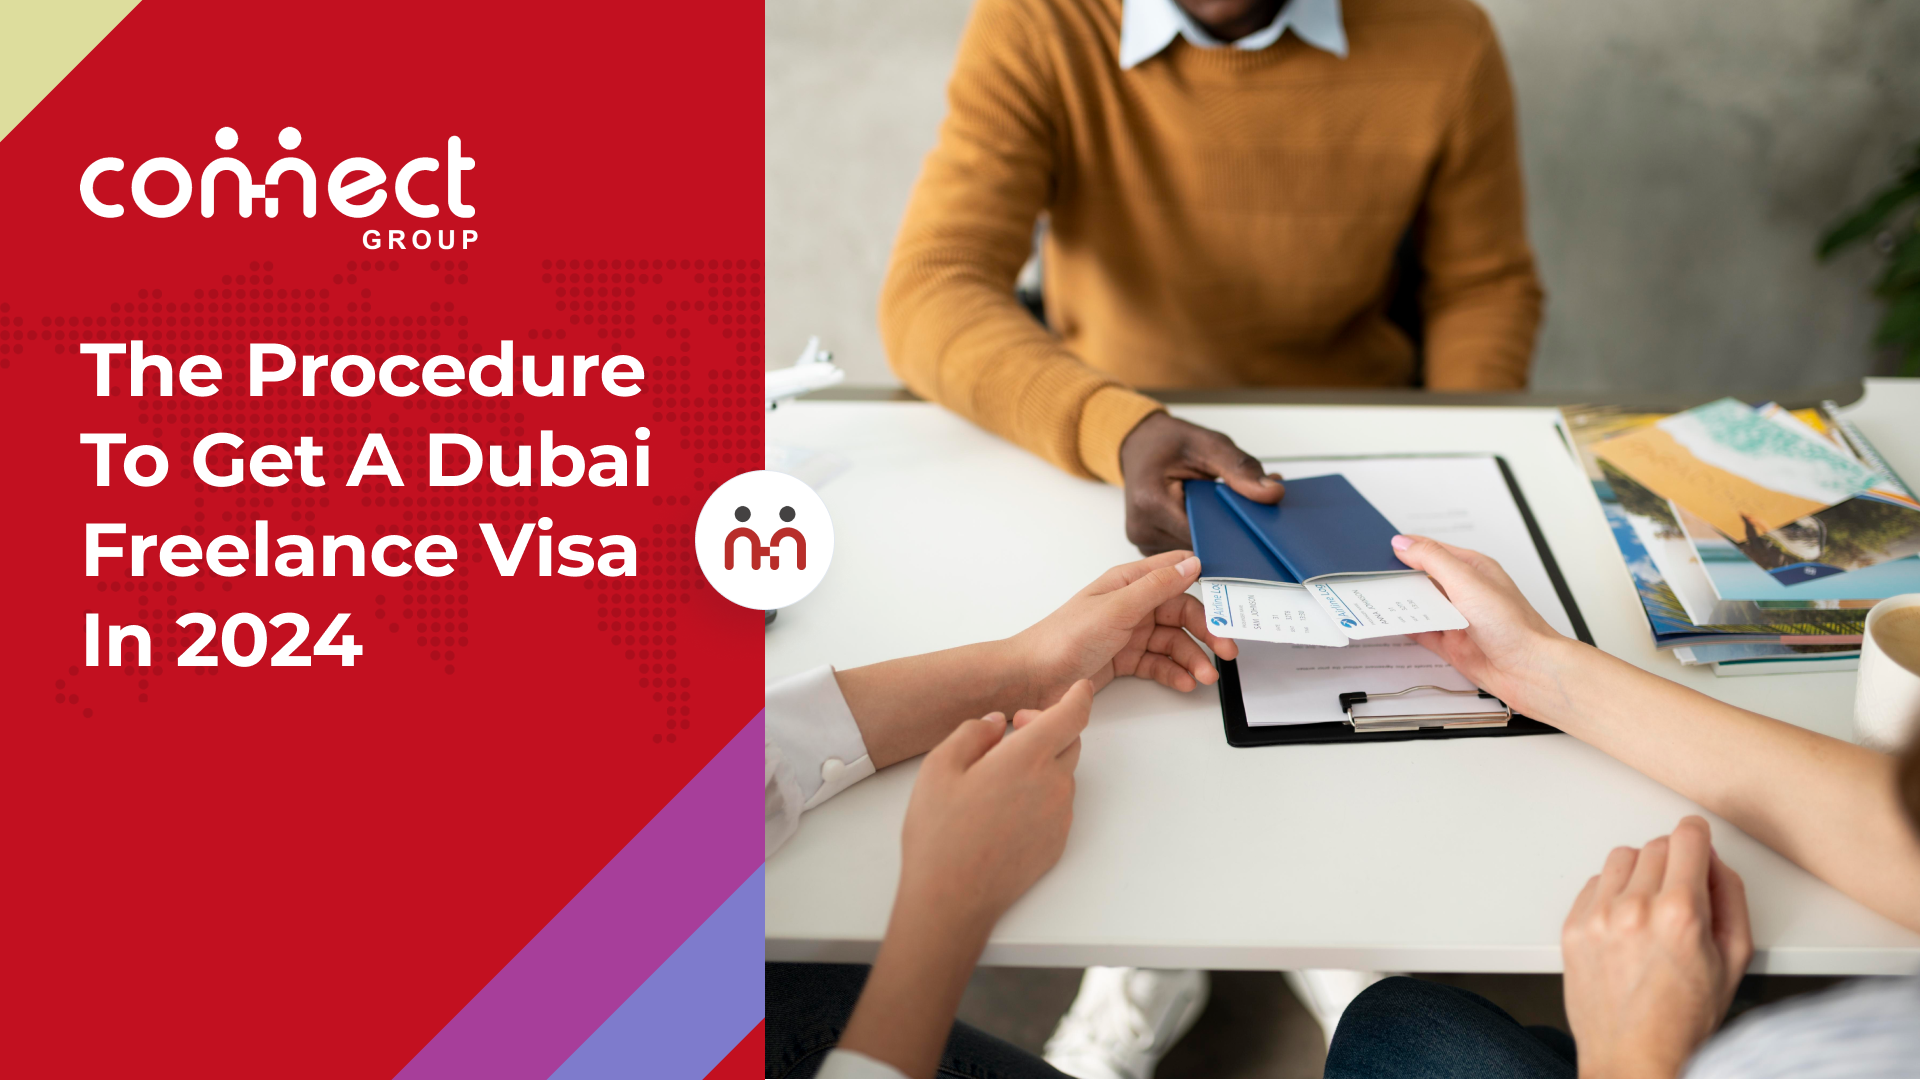 What Are The Procedure To Get A Dubai Freelance Visa In 2024